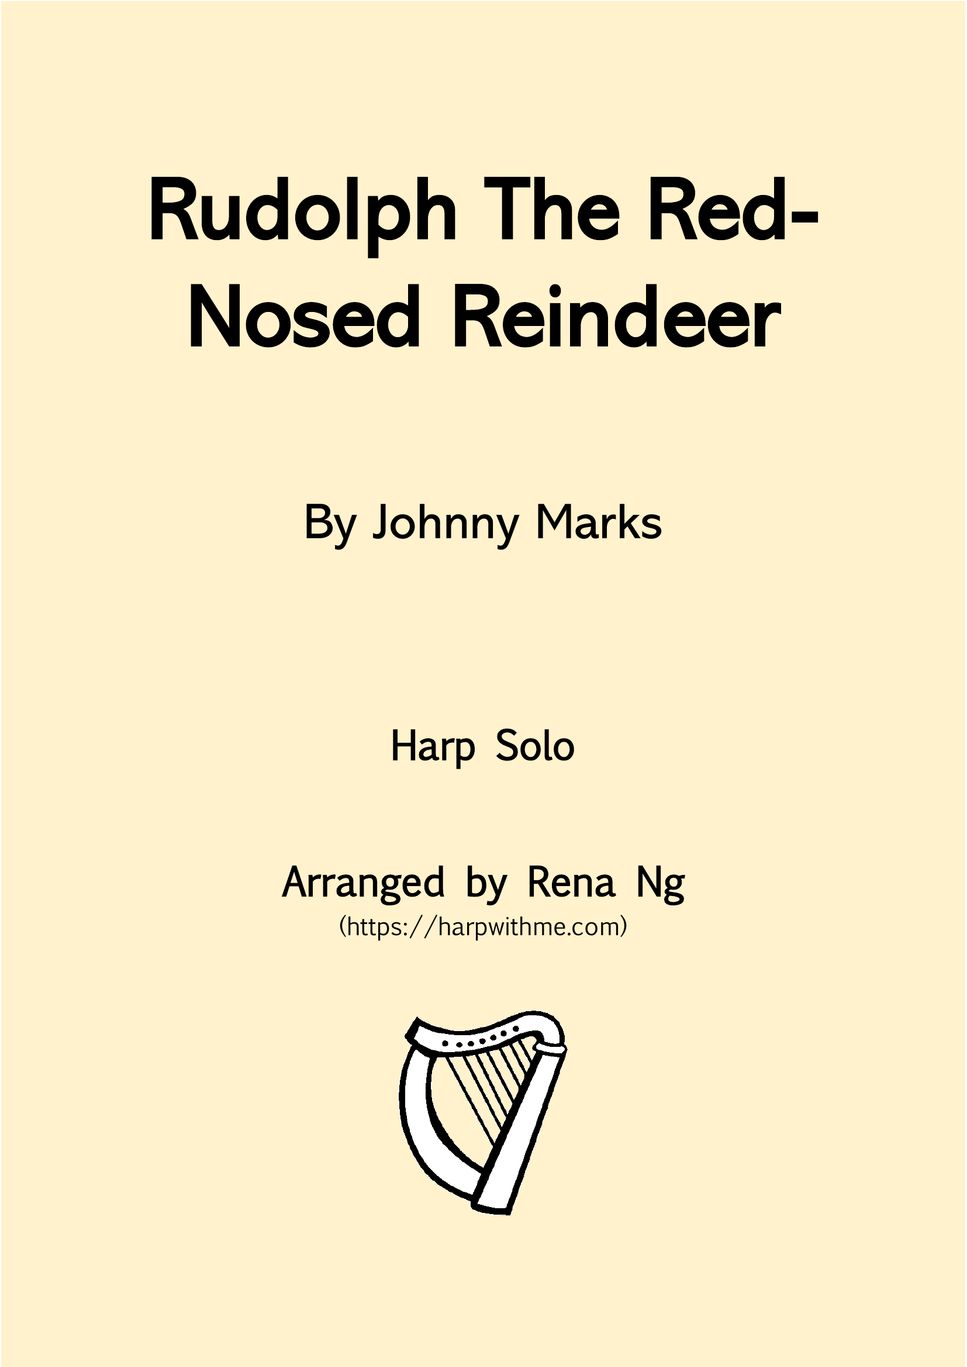 Rudolph The Red-Nosed Reindeer (Harp Solo) by Harp With Me